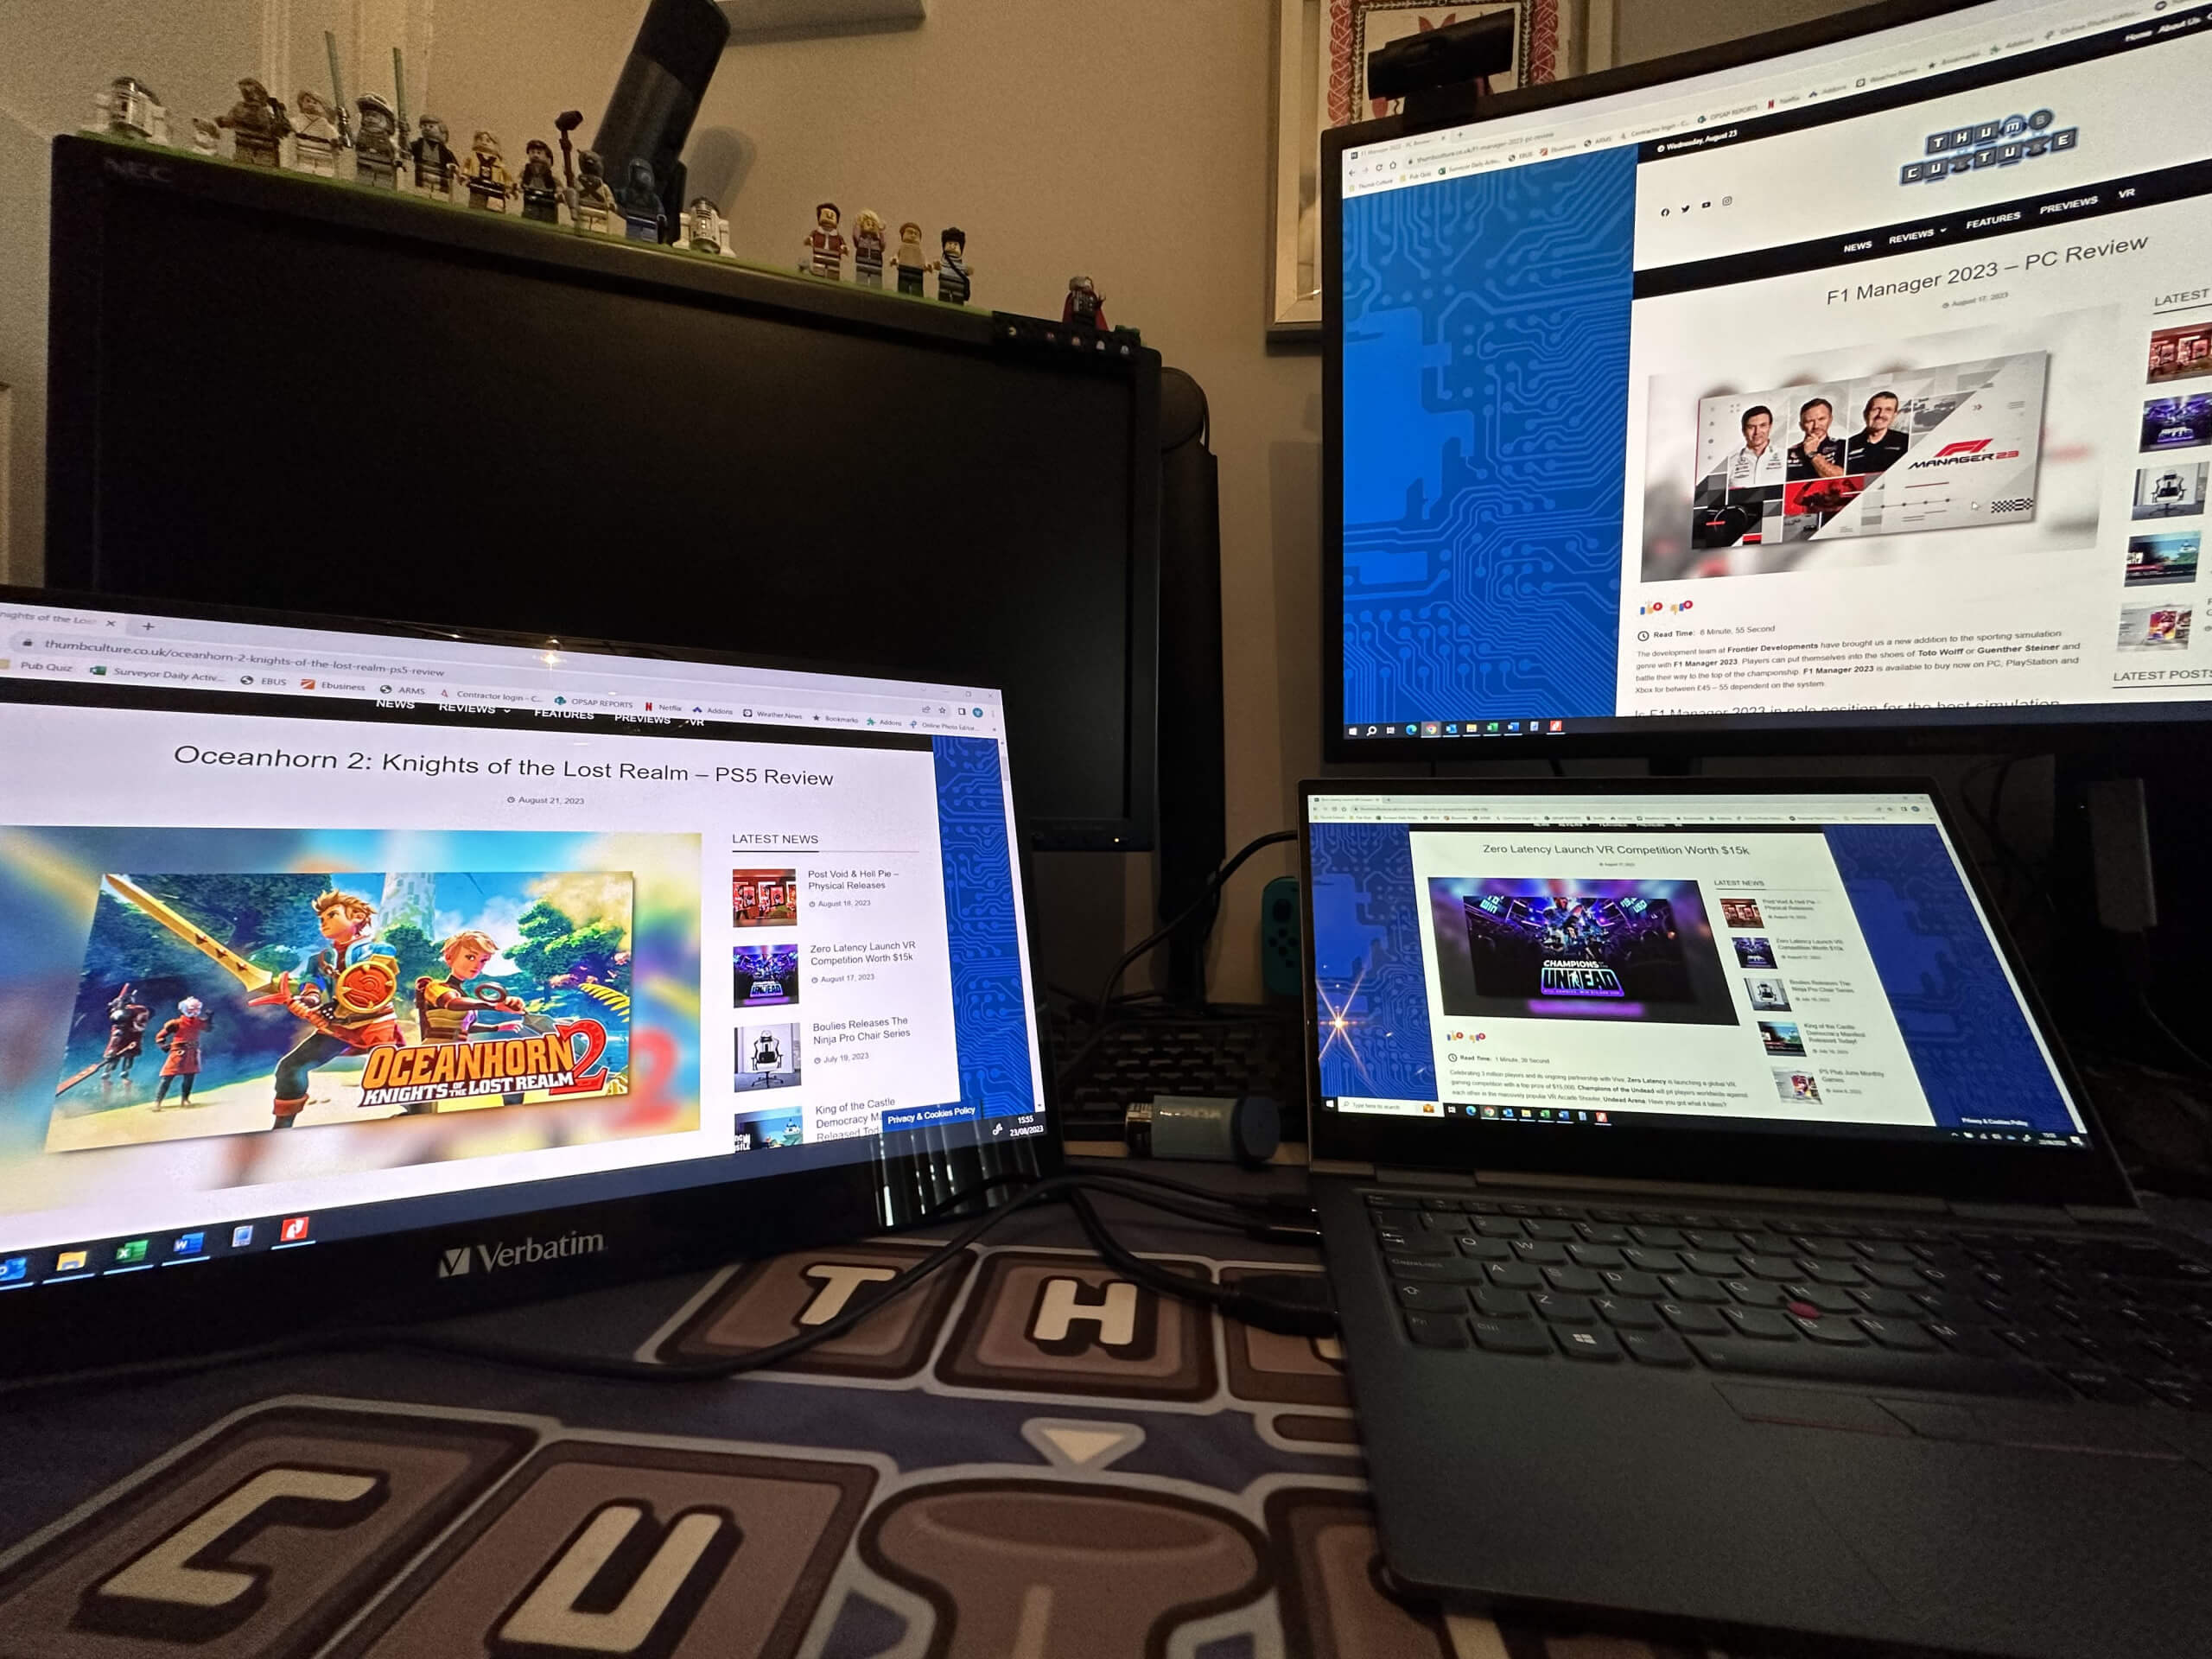 This image shows the verbatim pmt-17 next to a laptop that is also outputting to the monitor on the right side of the screen. each screen showing a different Thumb Culture review.